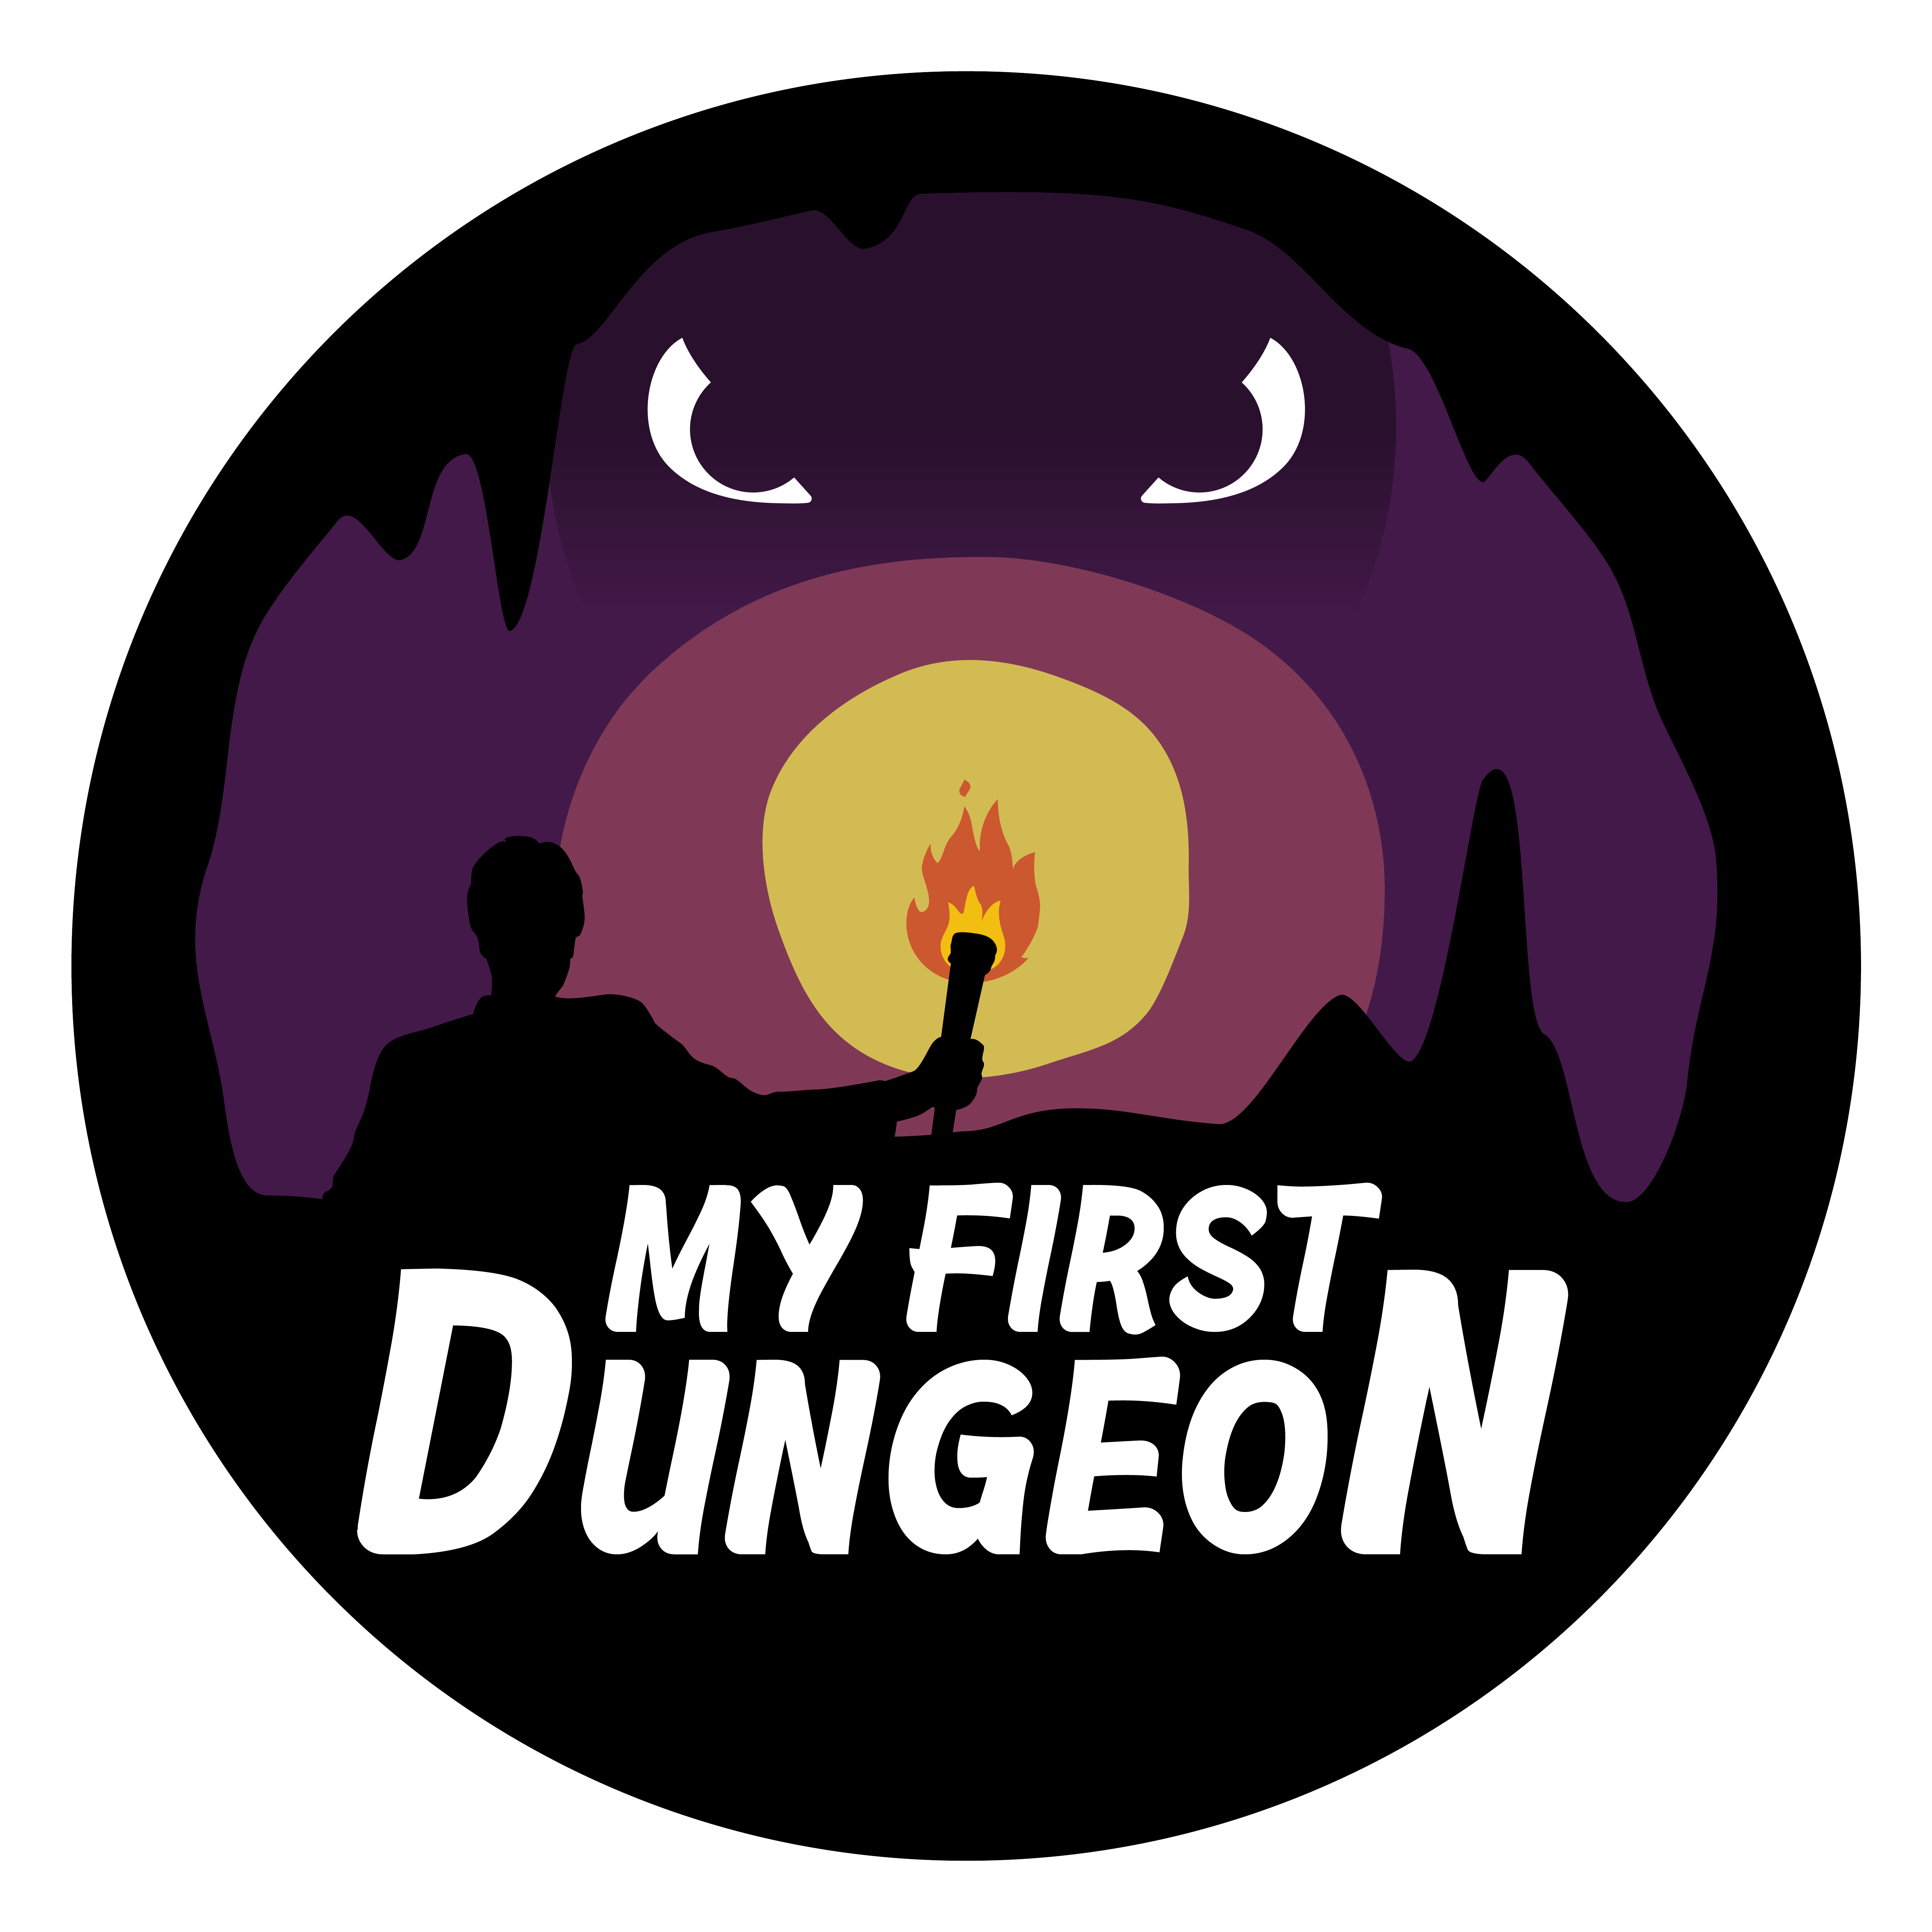 My First Dungeon - Logo with edge